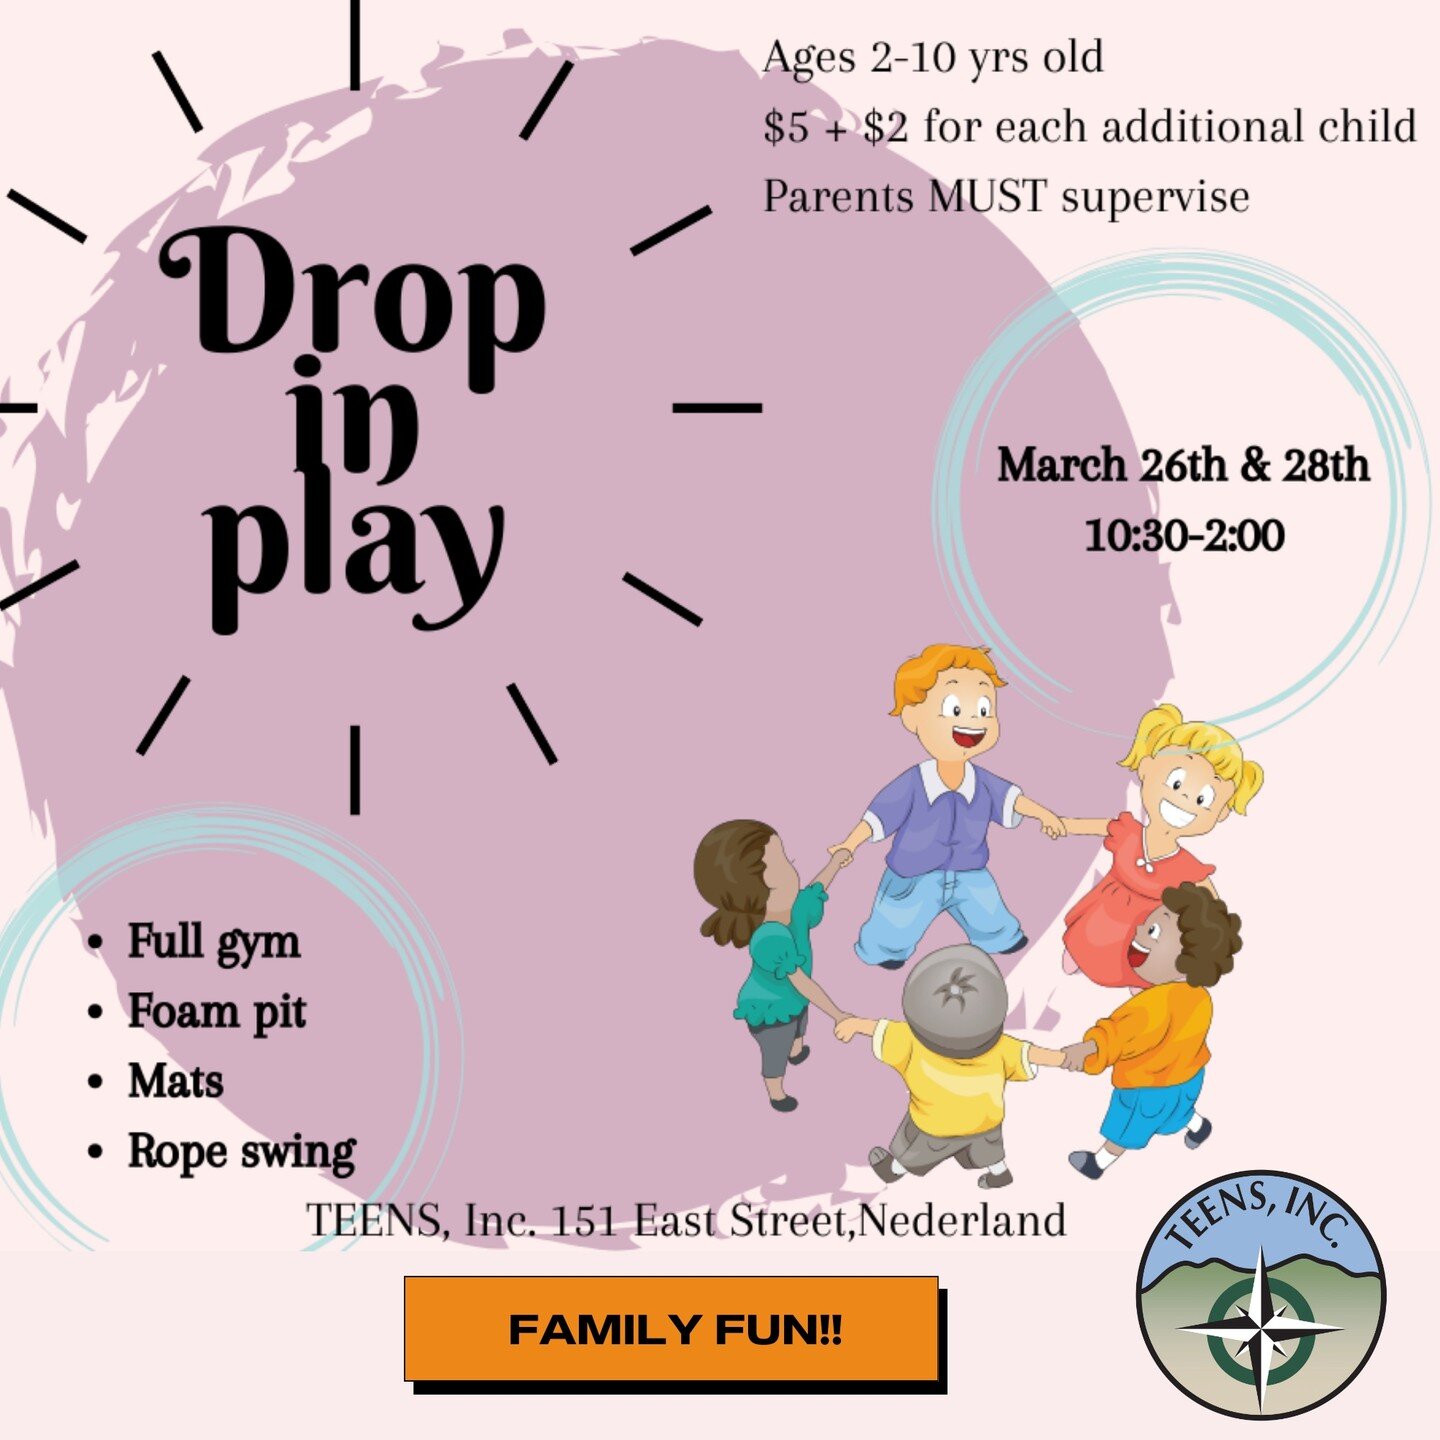 Spring Break is almost here and that means Drop-In Play is back at the Teen Center. Next Tuesday (3/26) and Thursday (3/28), bring your kids ages 2-10 for some fun at the gym!
Tonight is Youth Open Mic night at the TC -- and tomorrow is the big Sprin